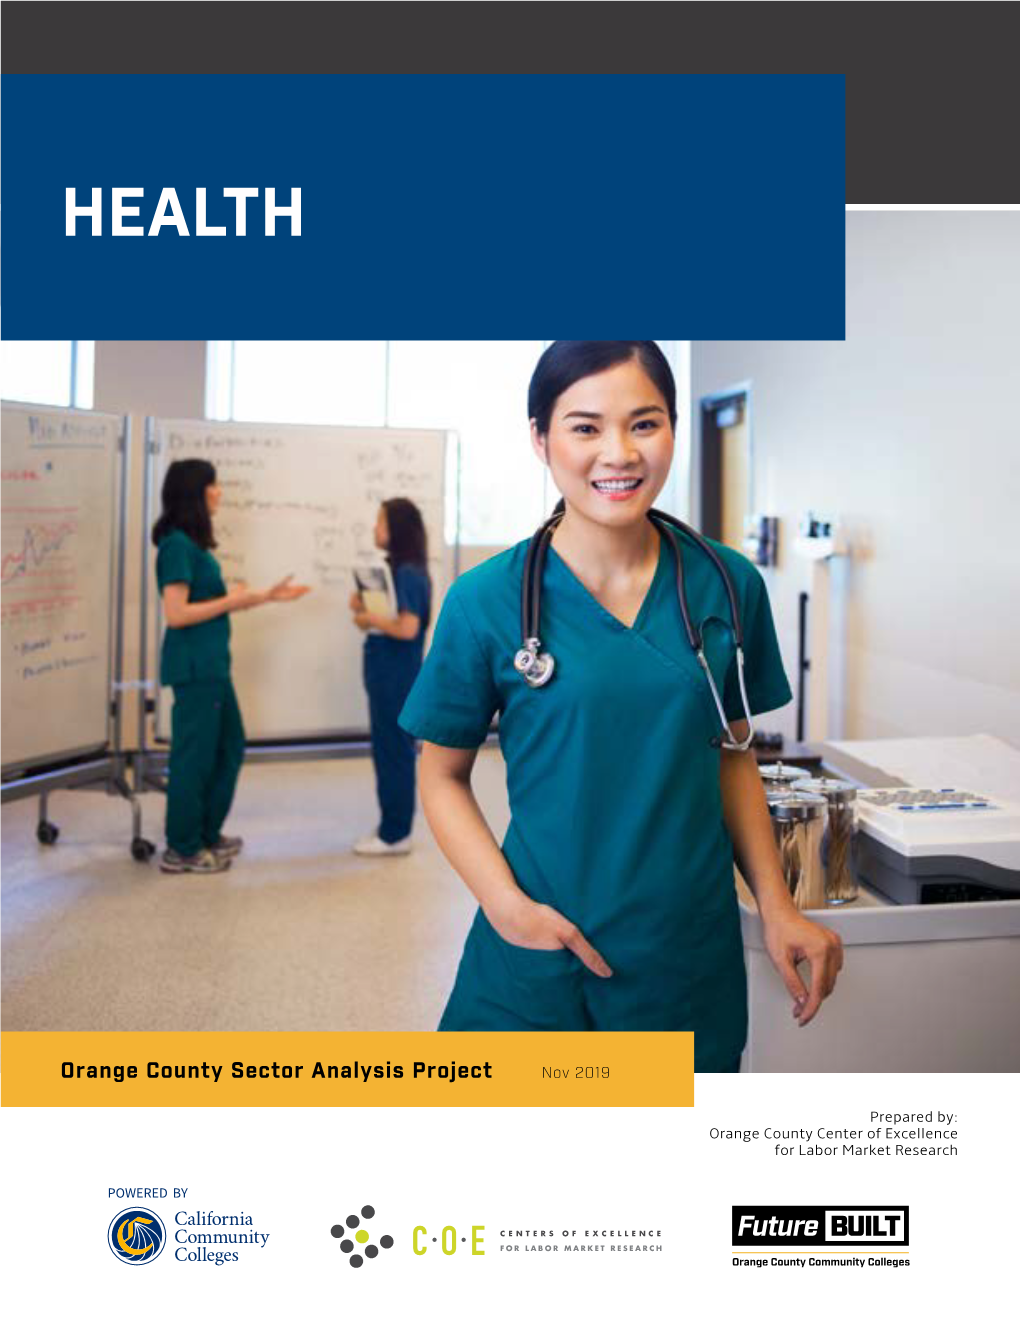 Orange County Sector Analysis Project: Health Sector Brief